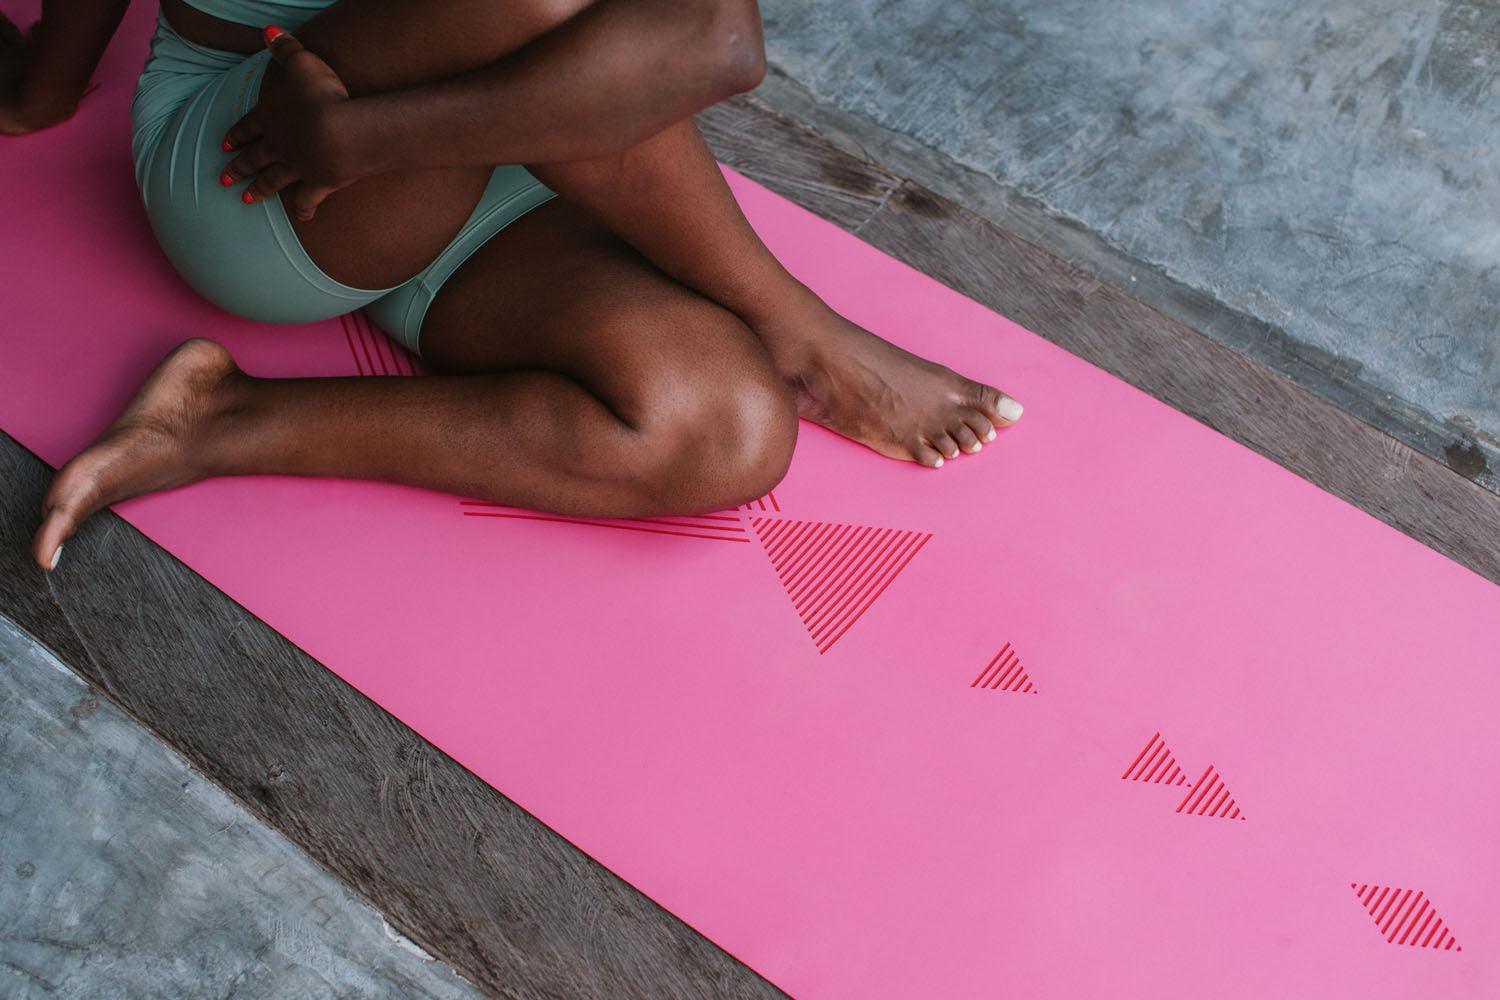 Infinity Yoga Mat - 5mm - Tribal Rose - The Best Yoga Mat provides great support - Yoga Design Lab 